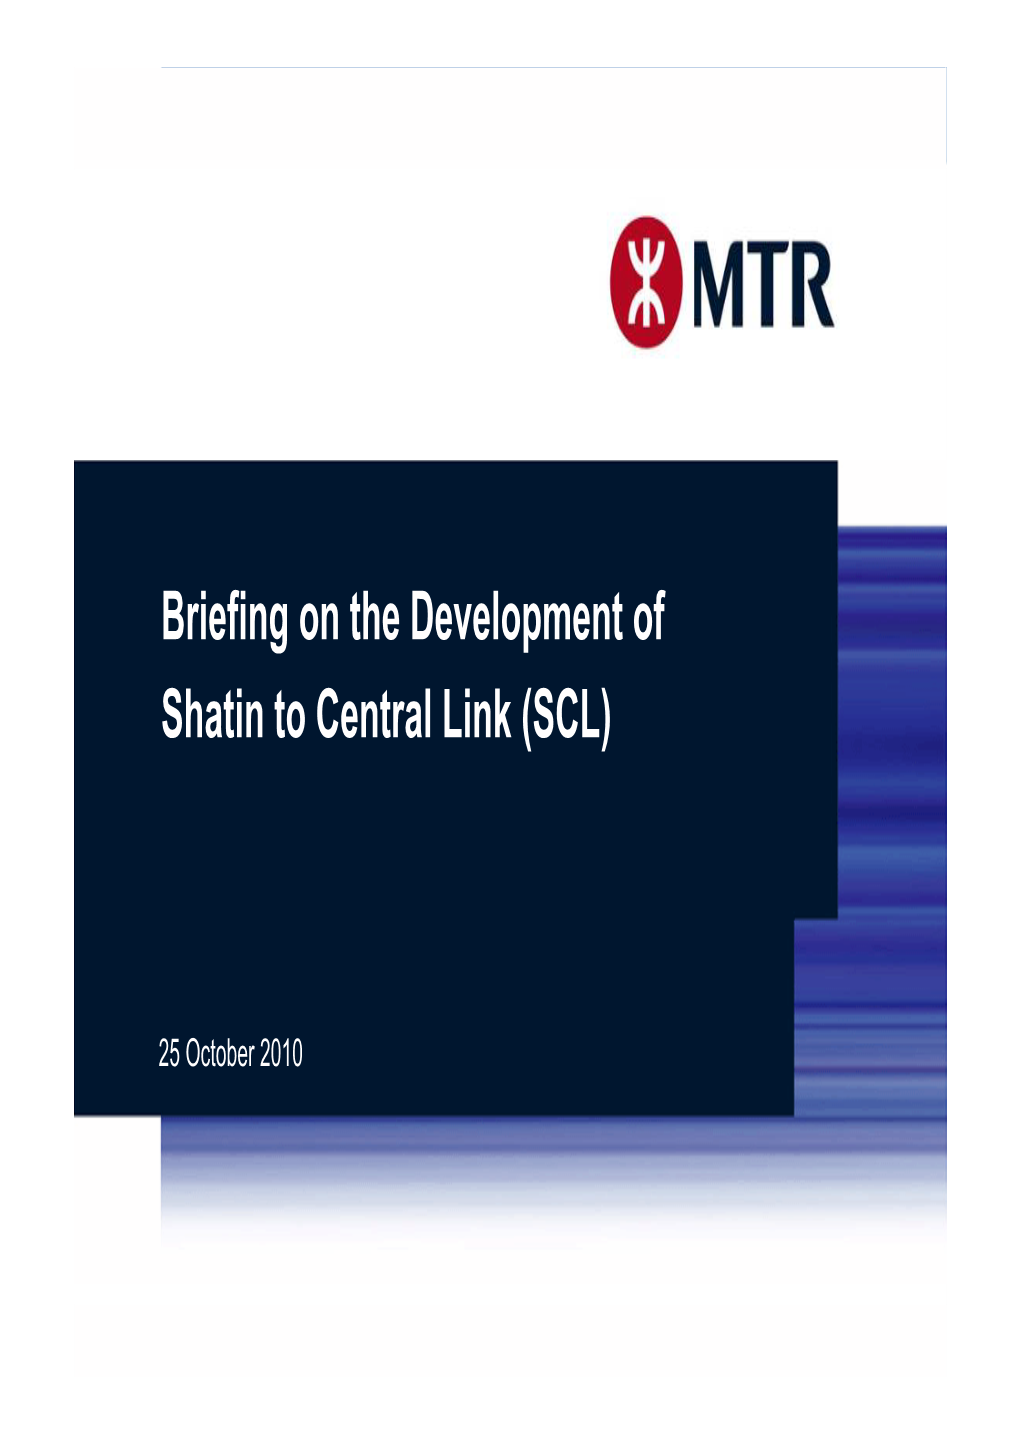 Briefing on the Development of Shatin to Central Link (SCL)